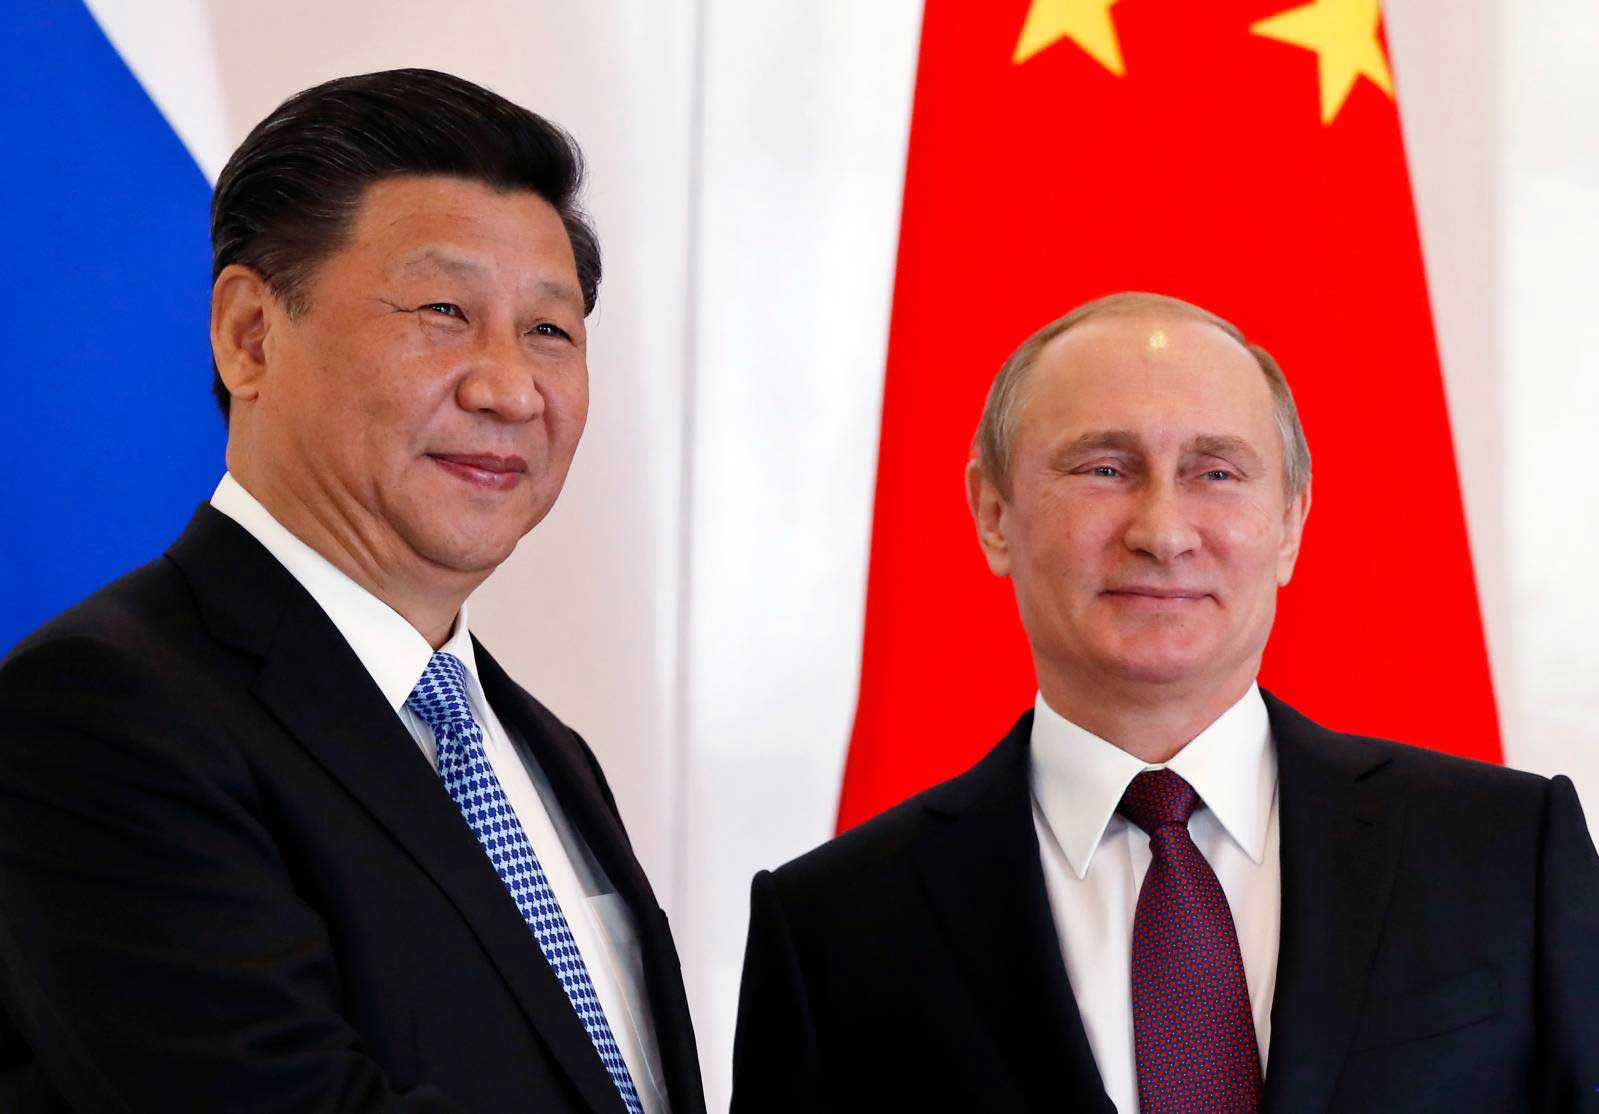 Xi and Putin planned to meet when Trump was inaugurated as President in 2016